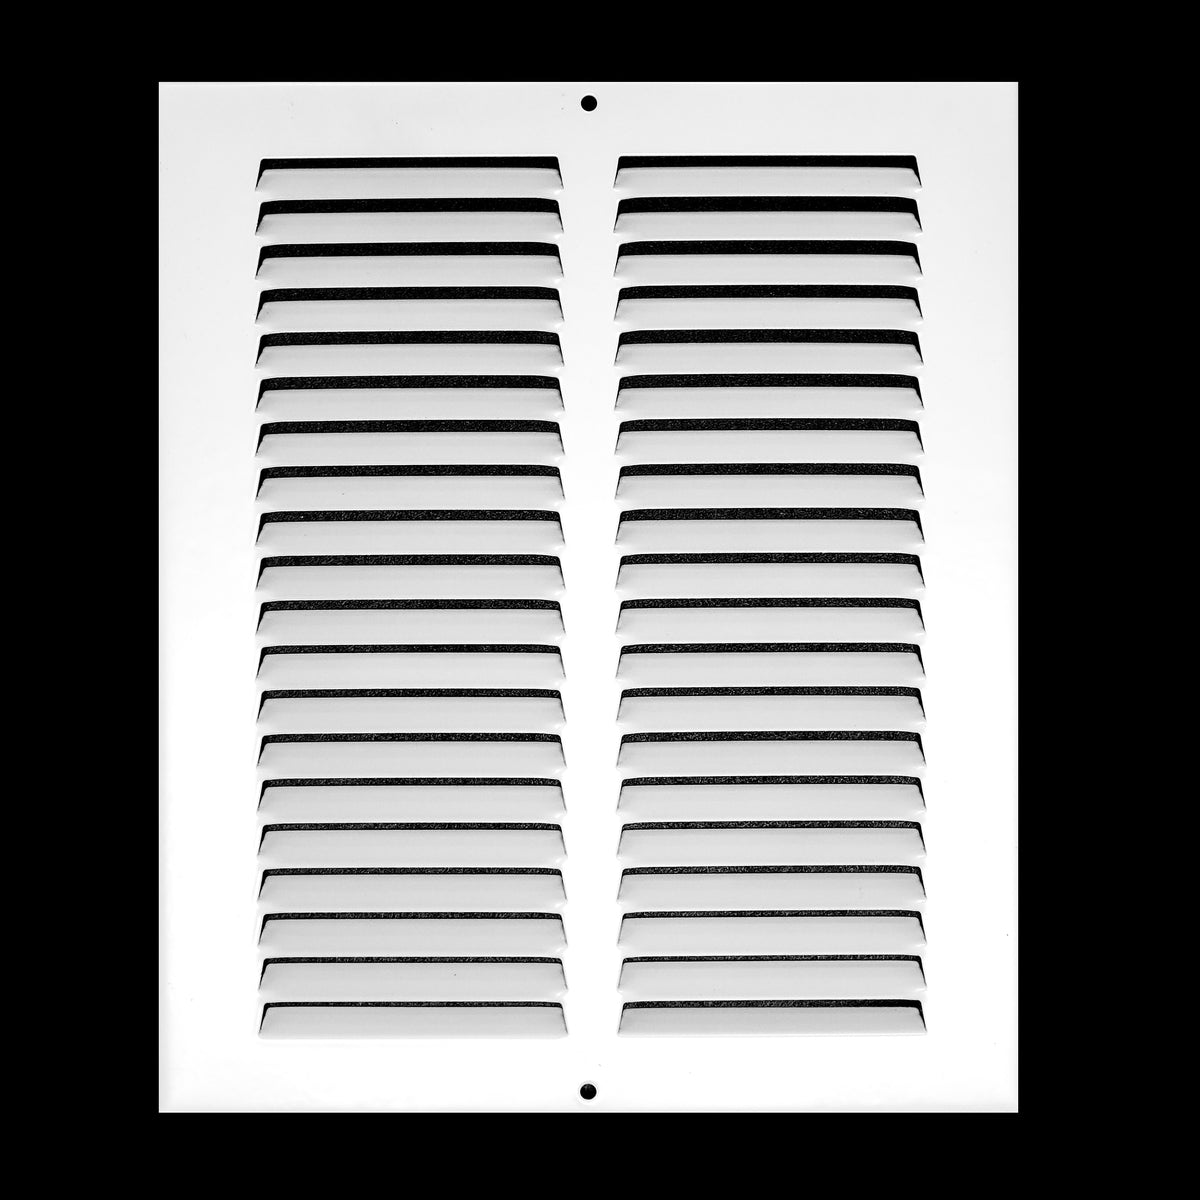 airgrilles 8" x 10" duct opening steel return air grille for sidewall and ceiling hnd-flt-1rag-wh-8x10 038775628624 1